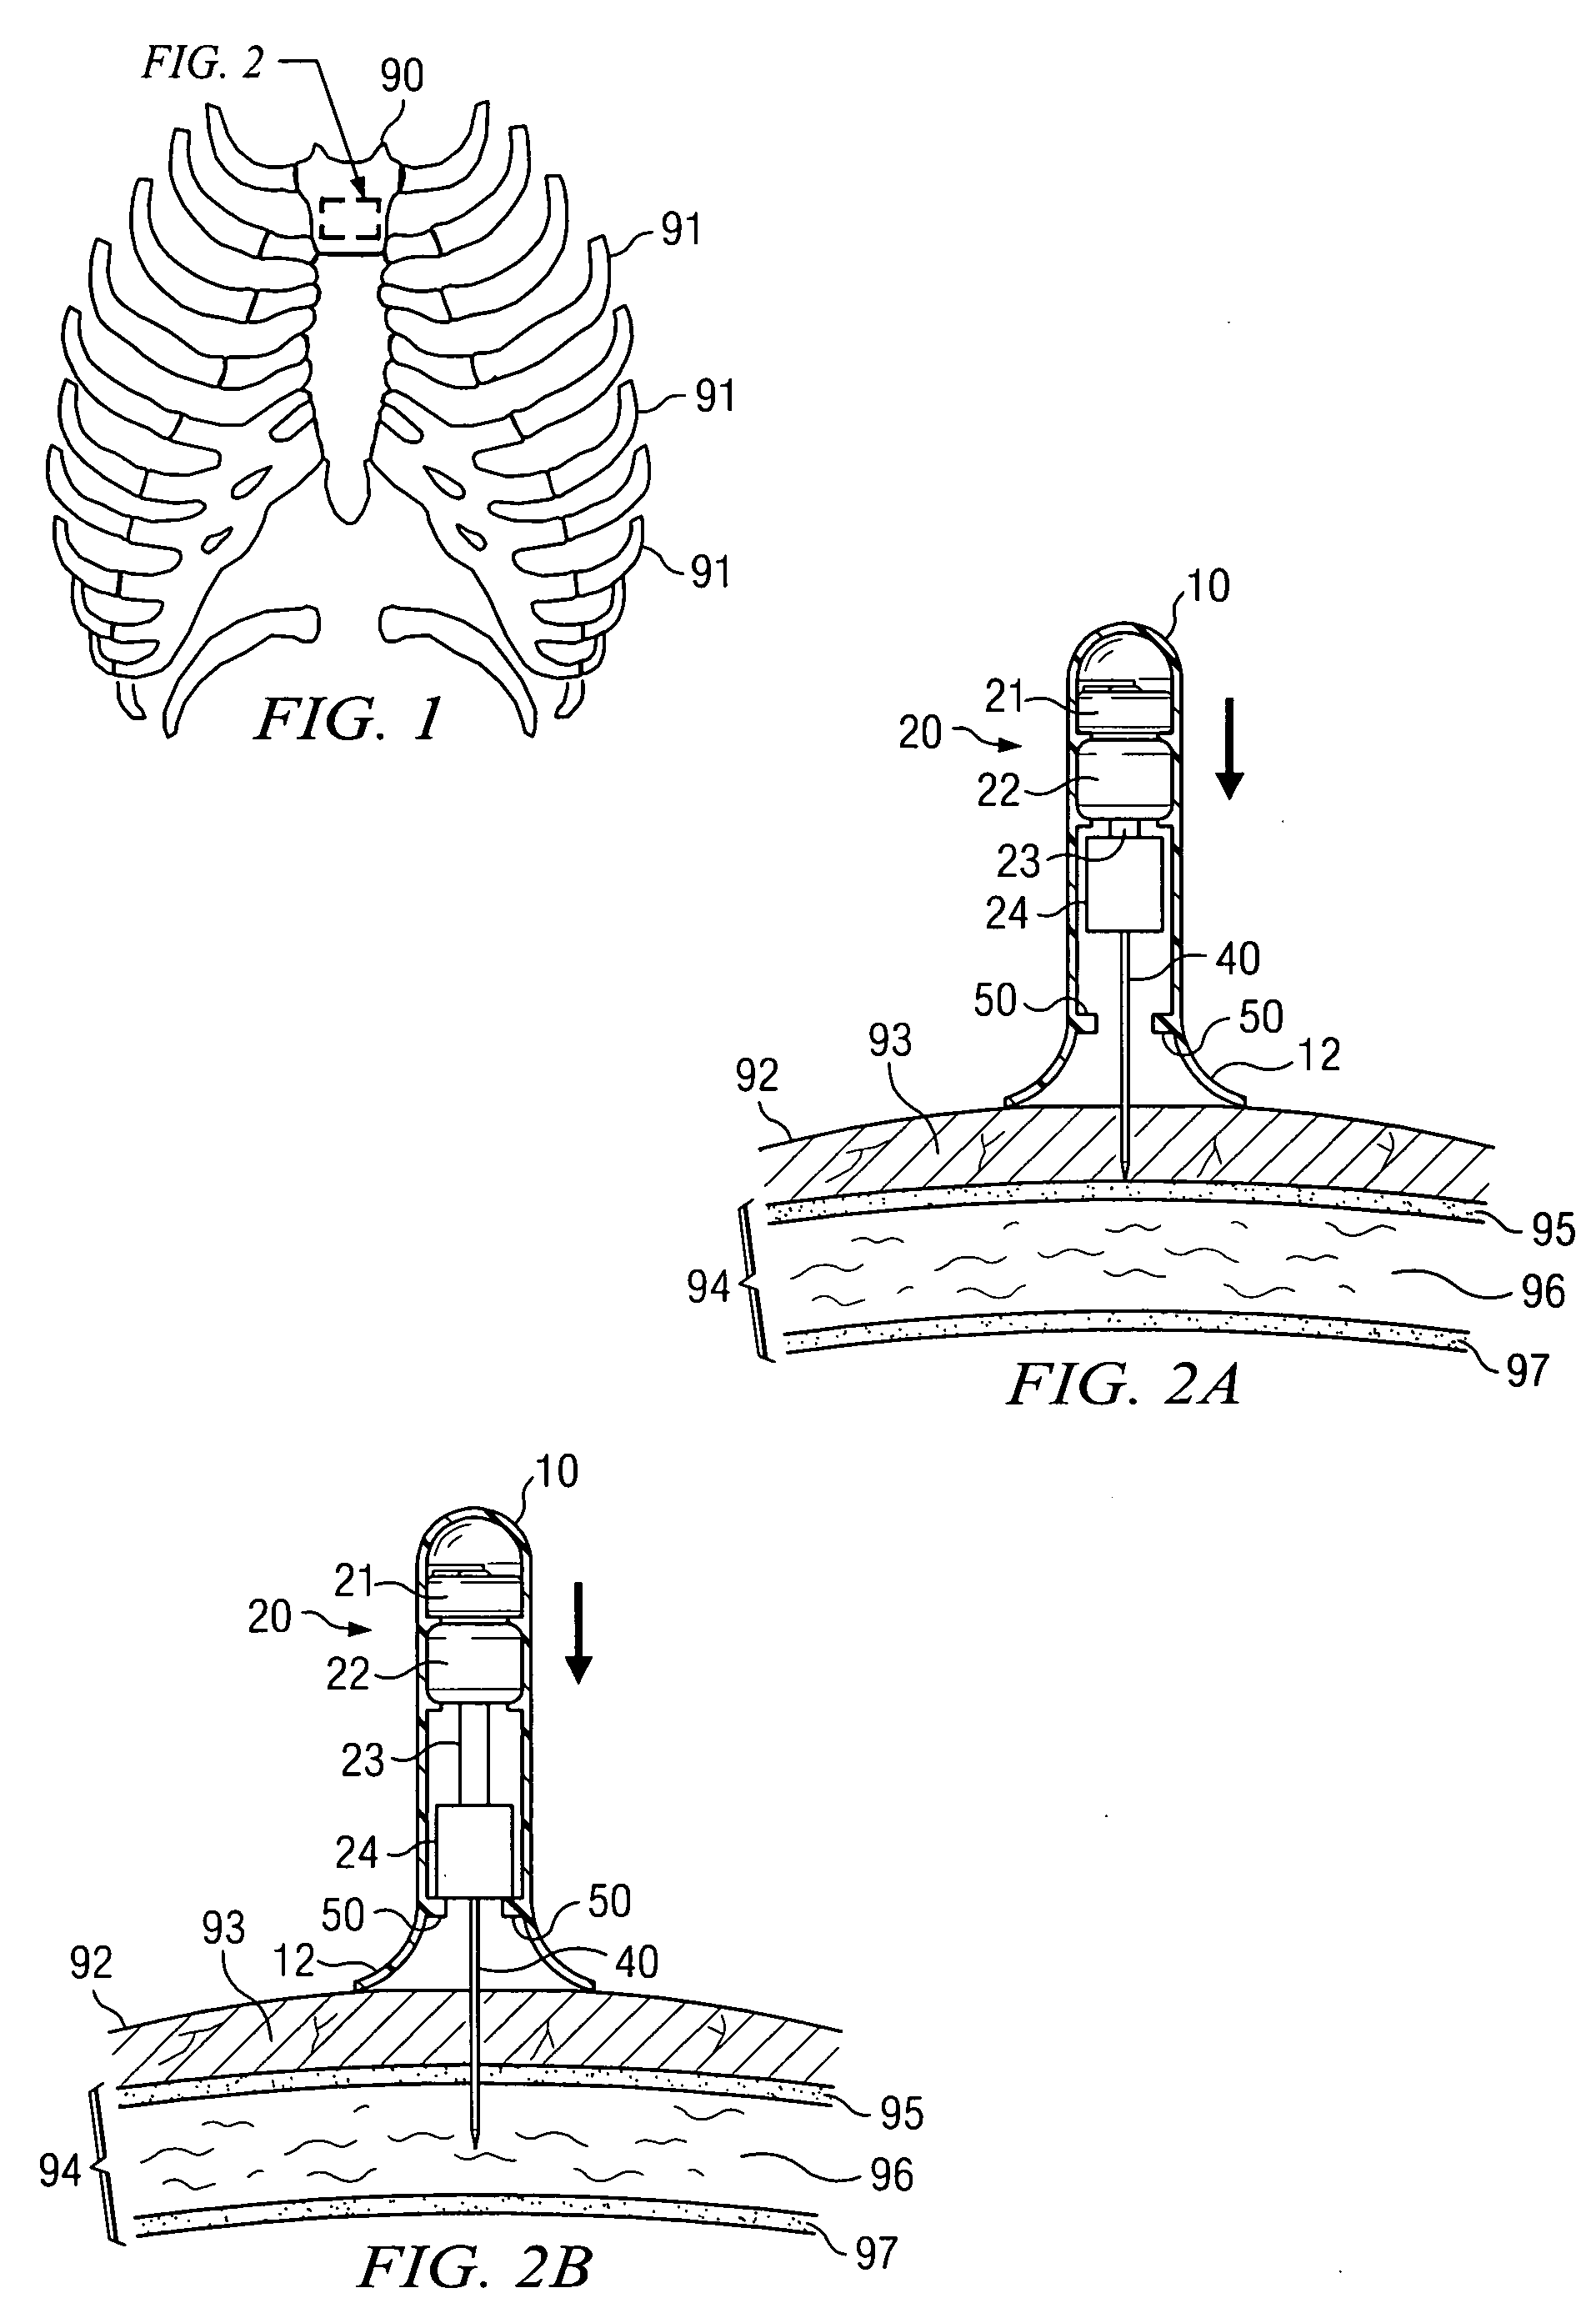 Apparatus and method for accessing the bone marrow